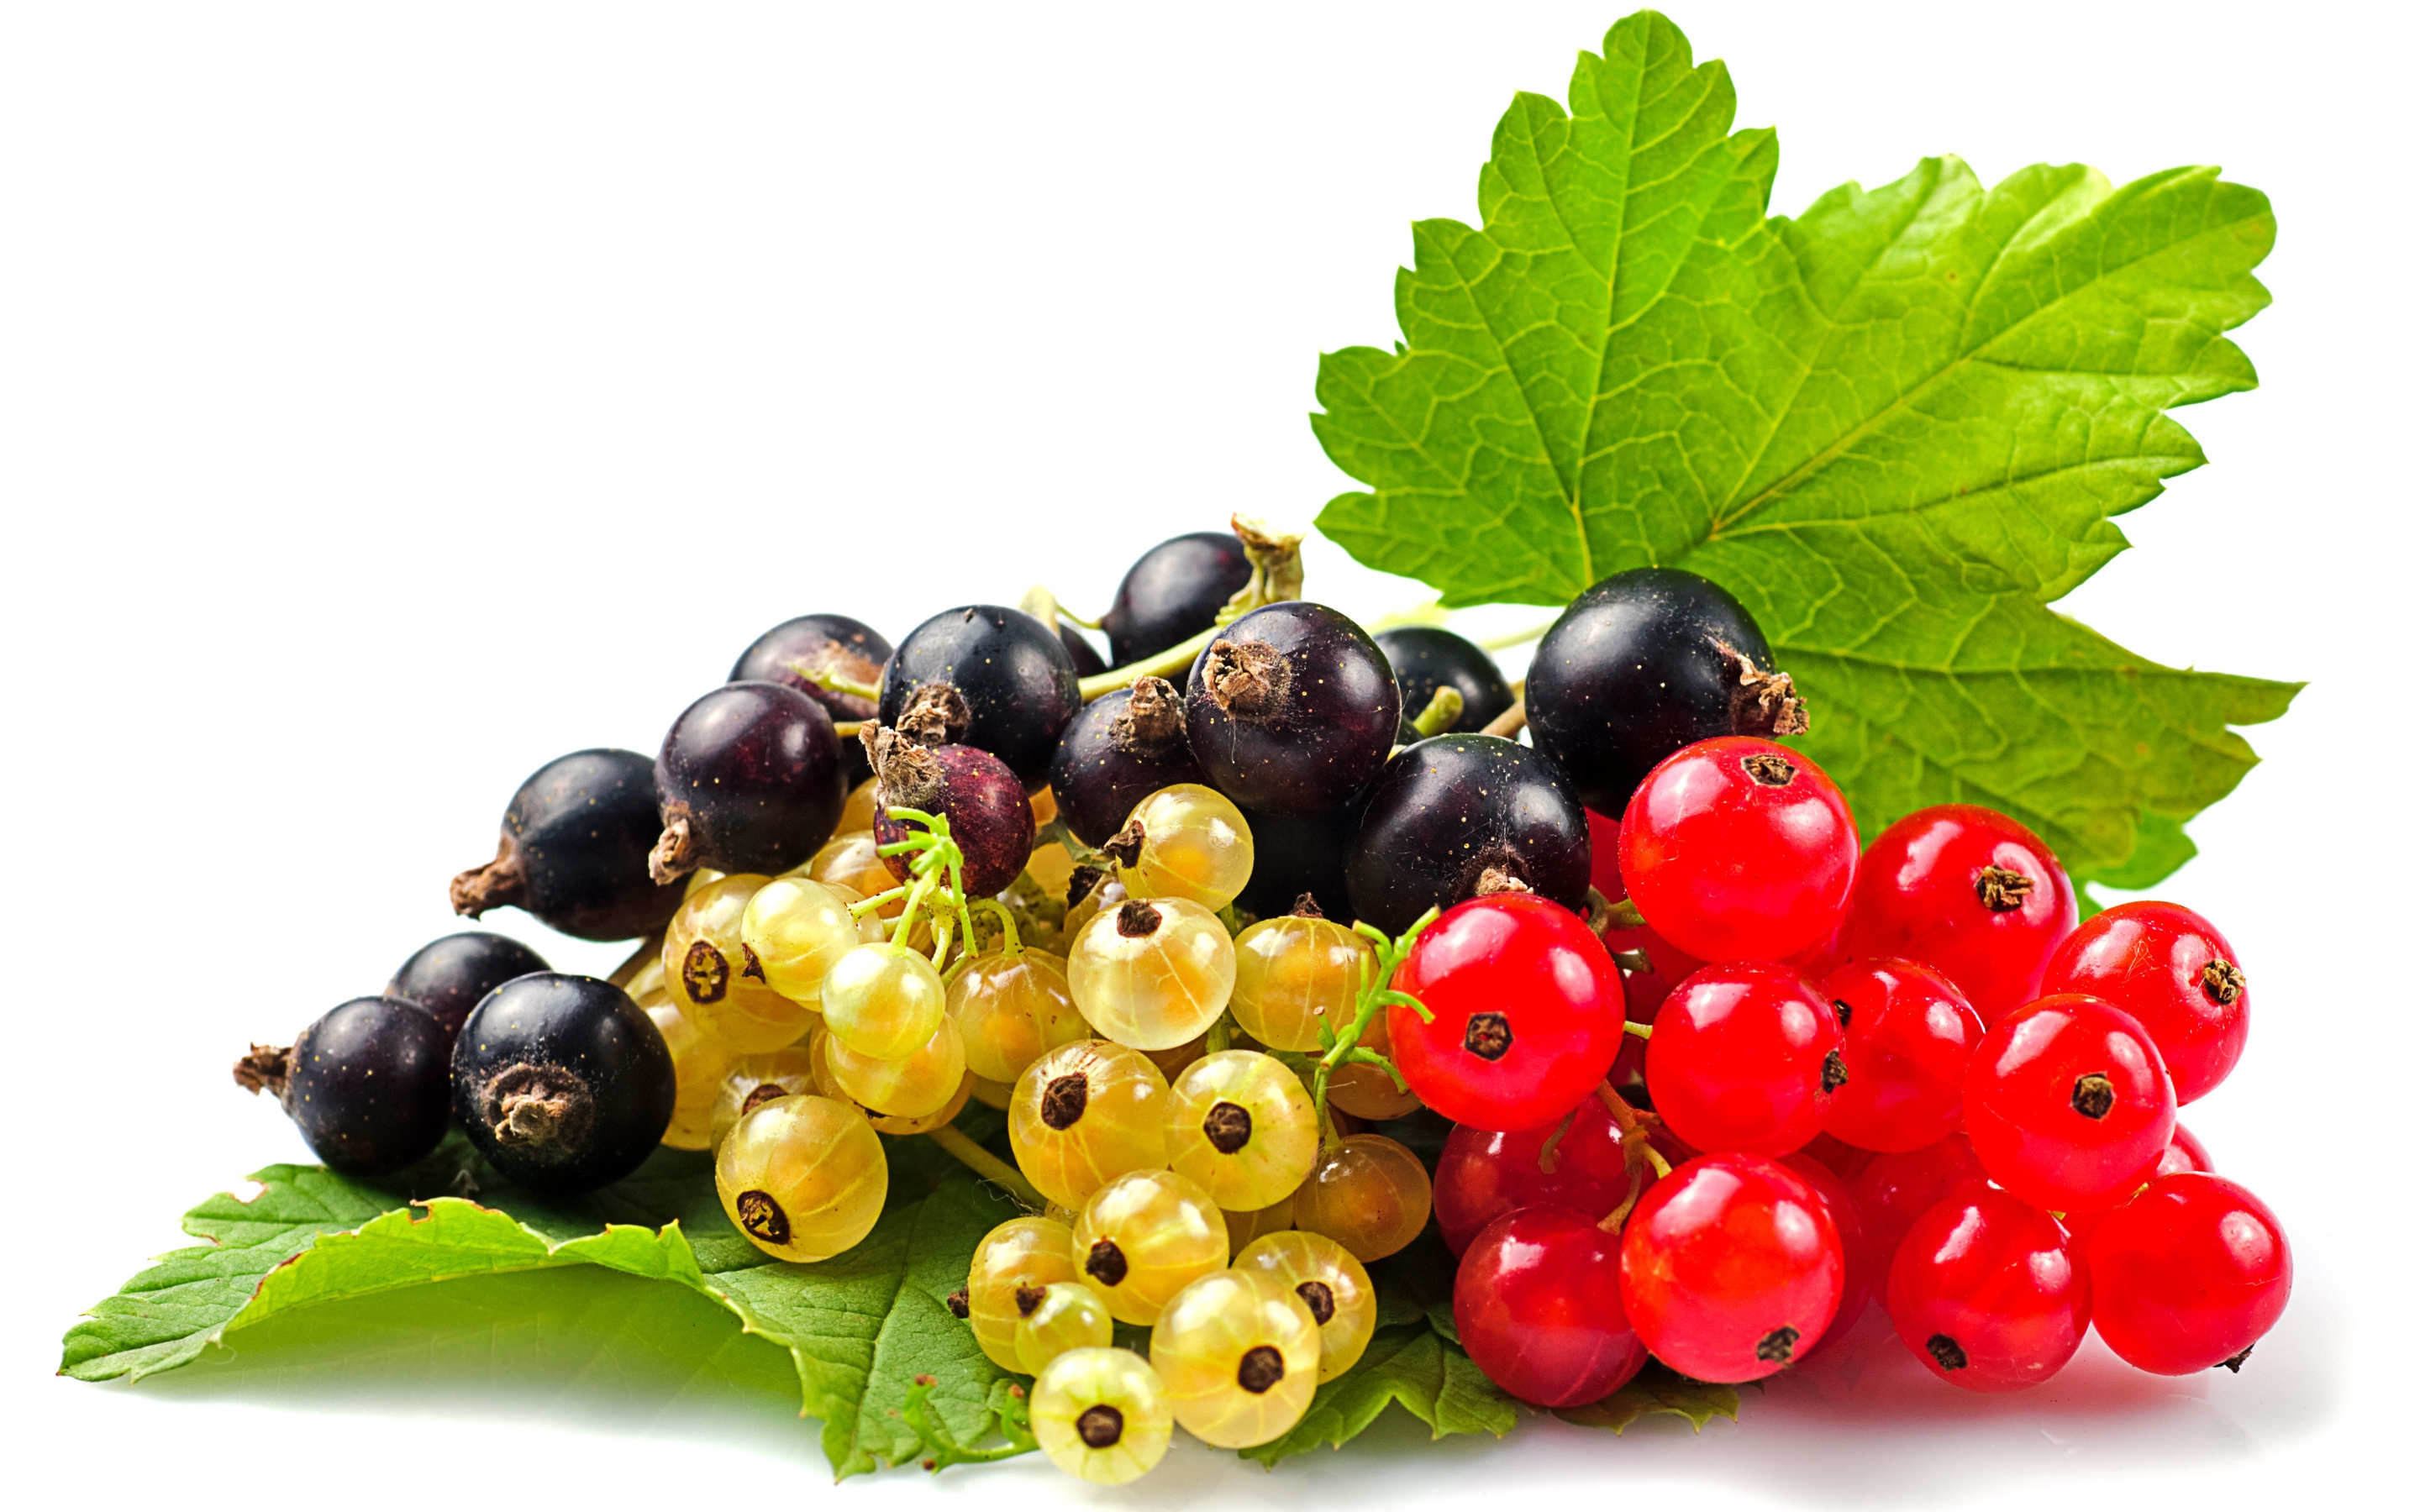 Currants Selection for 2880 x 1800 Retina Display resolution